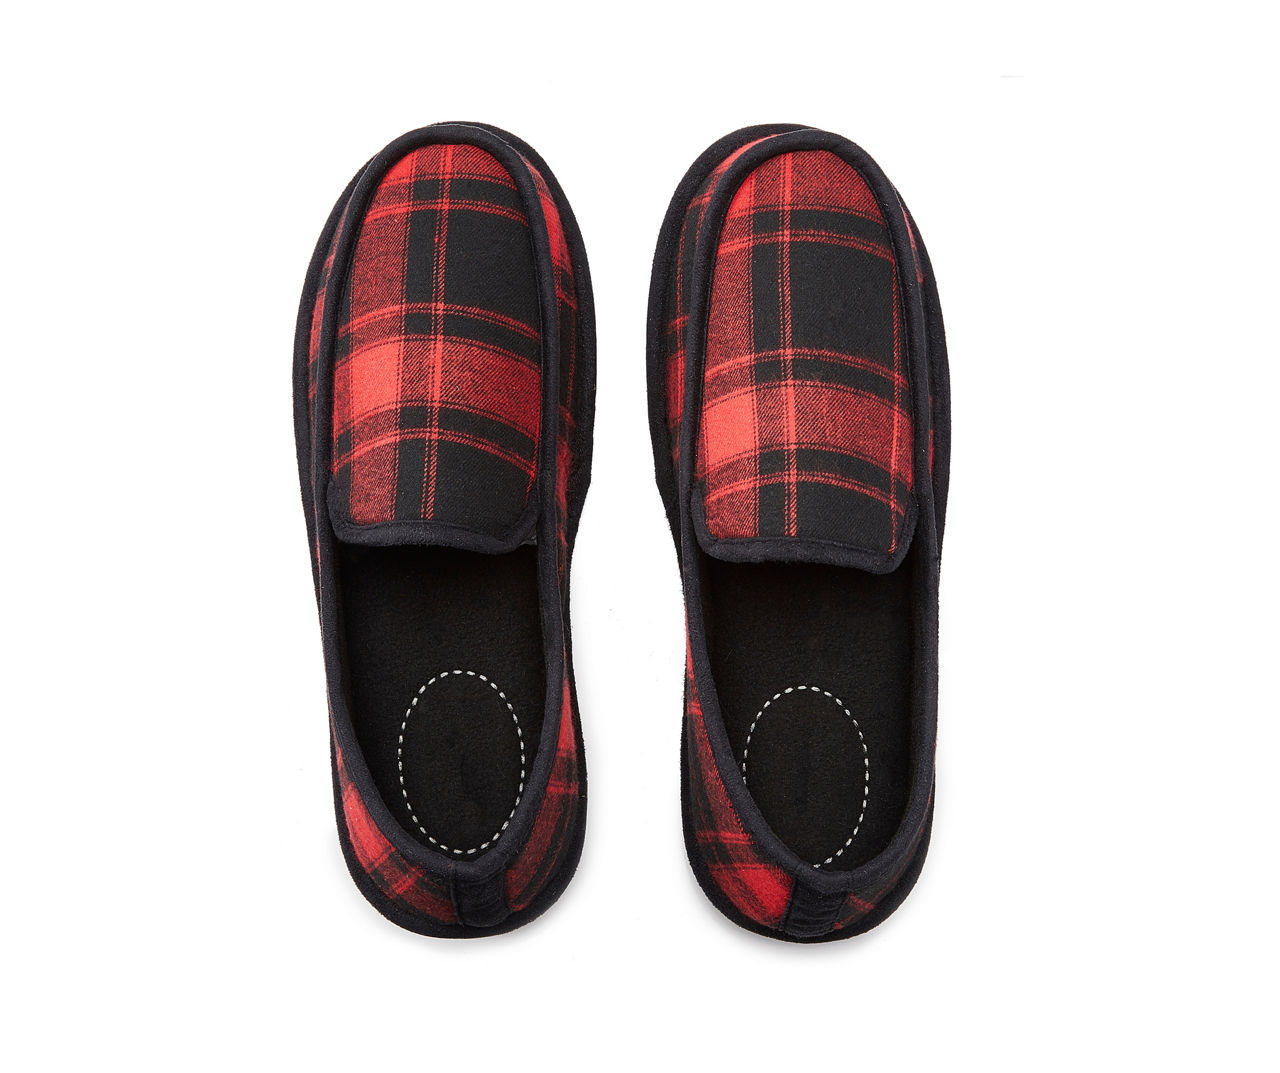 Men's Black & Red Plaid Moccasin Slippers, Size S